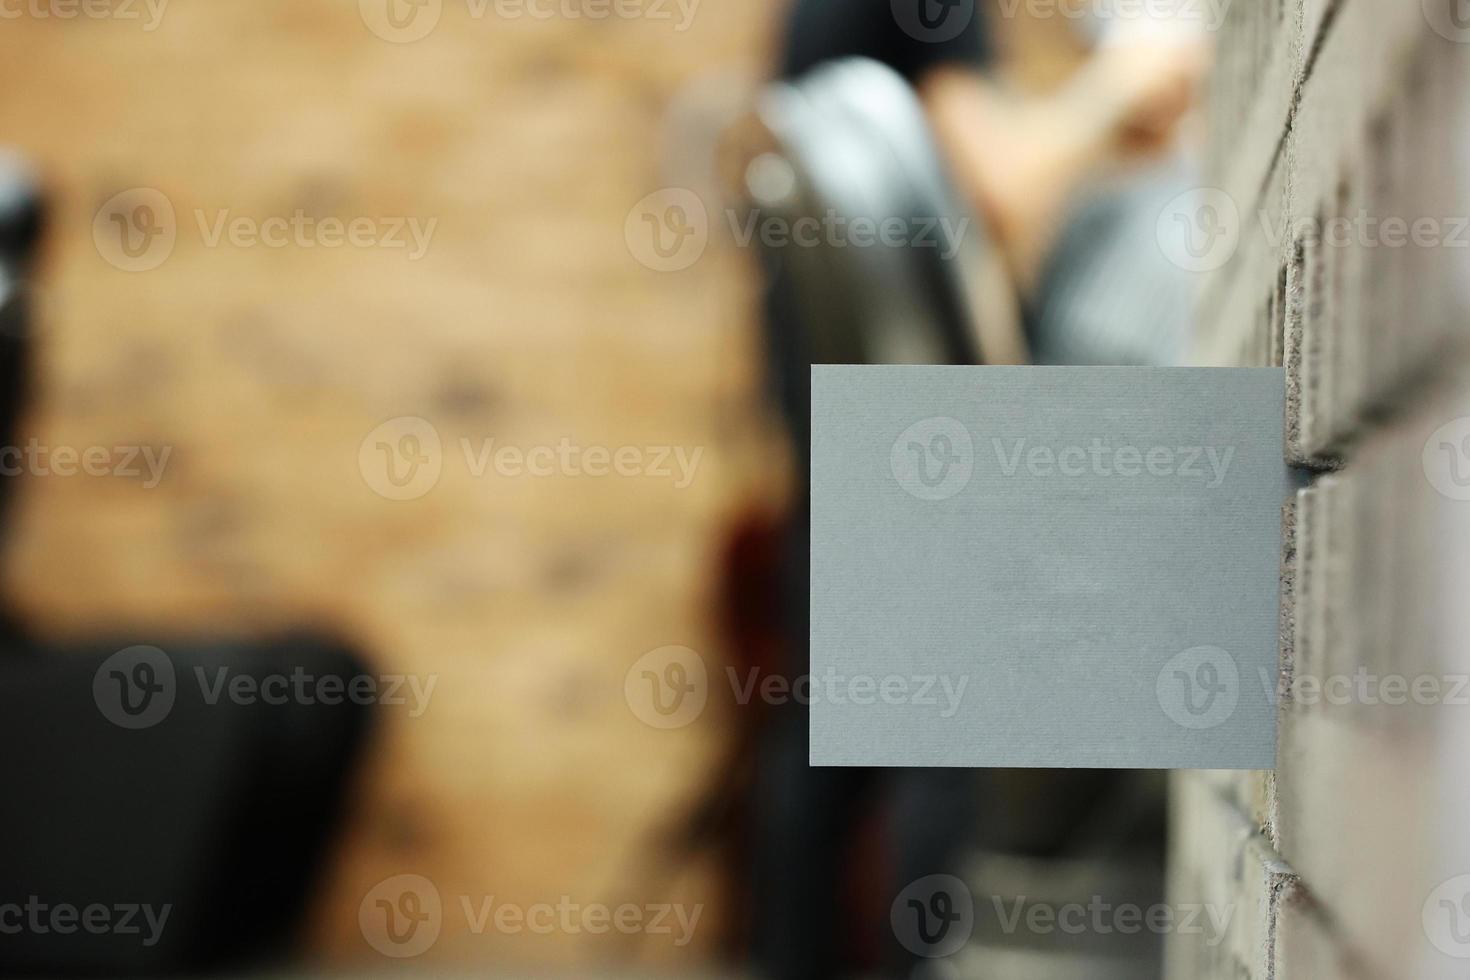 grey postcard or bossiness card with mock up on stylish barbershop or beauty salon background. blurred barber man is cutting and shaving the beard o client. photo